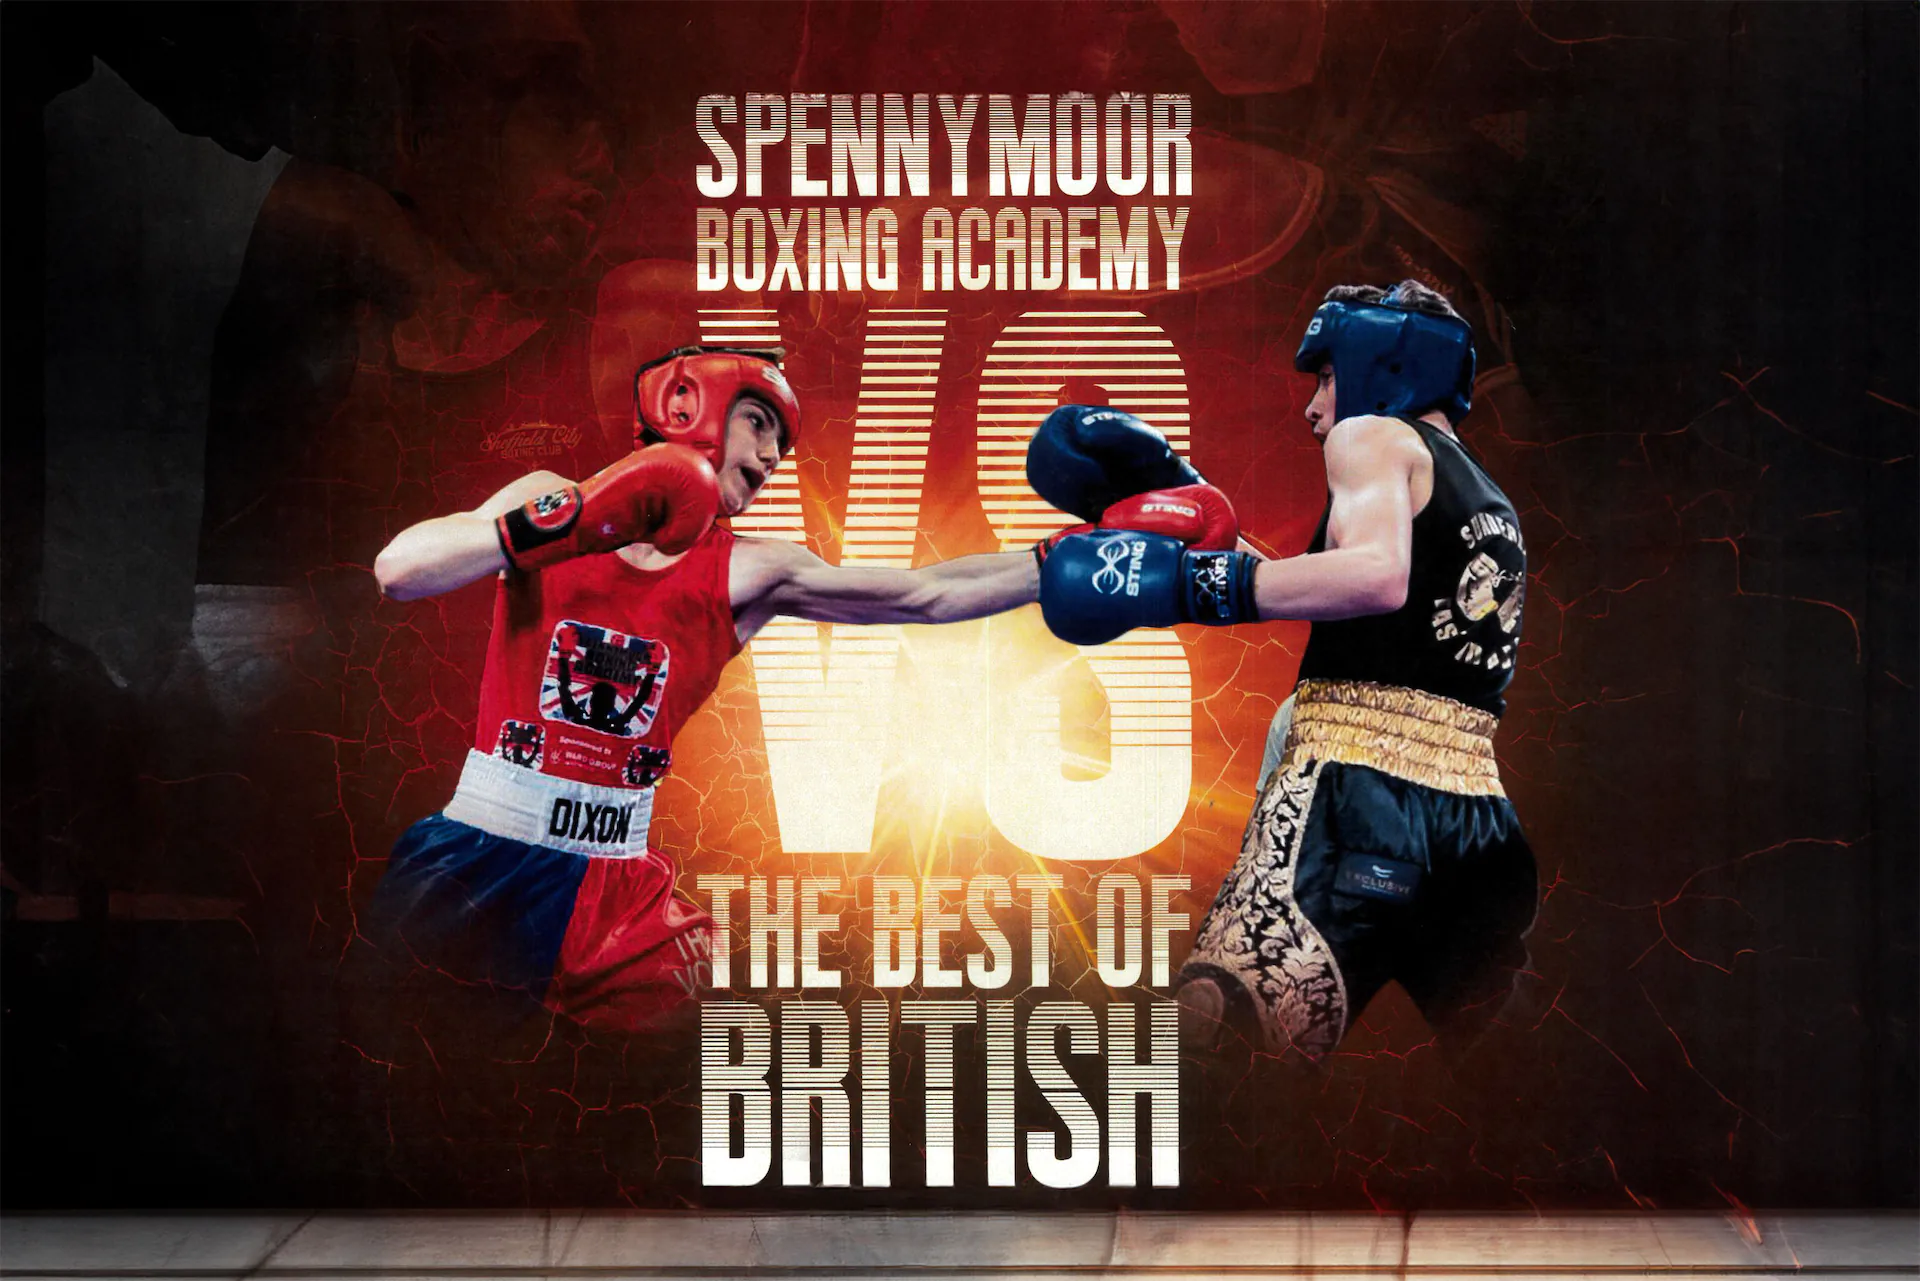 Spennymoor Boxing Academy Event